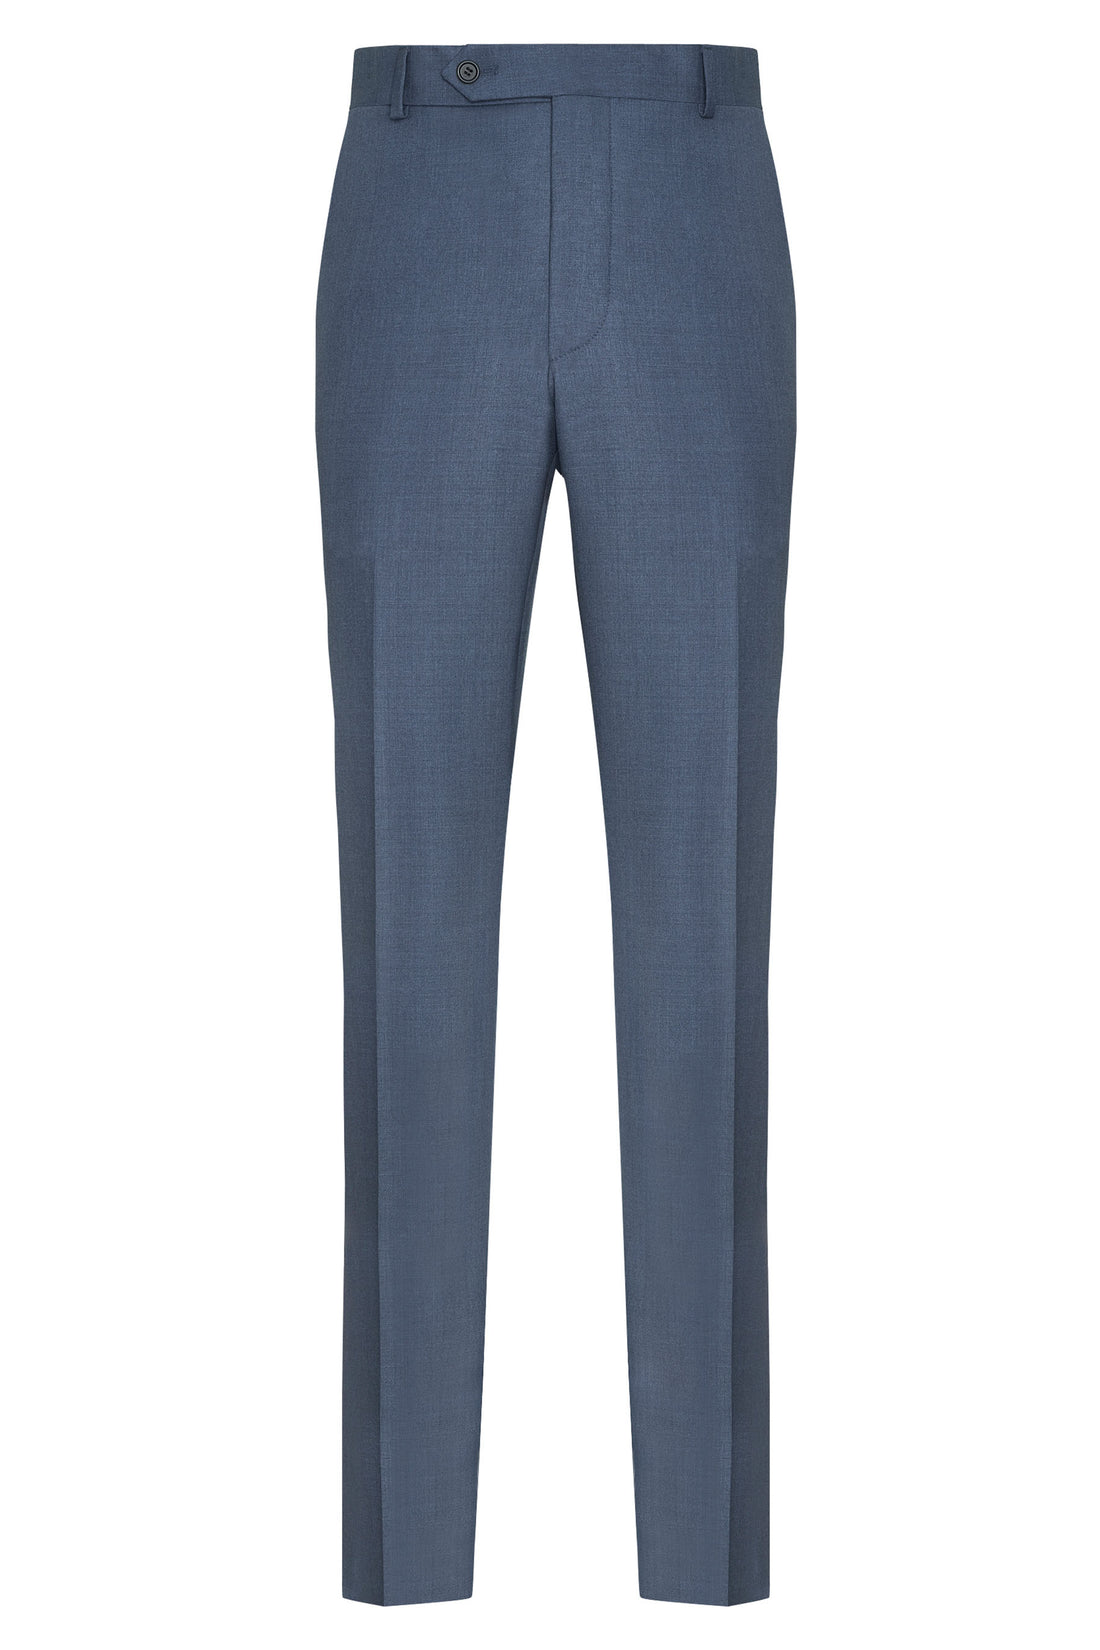 British Blue Flat Front Trousers